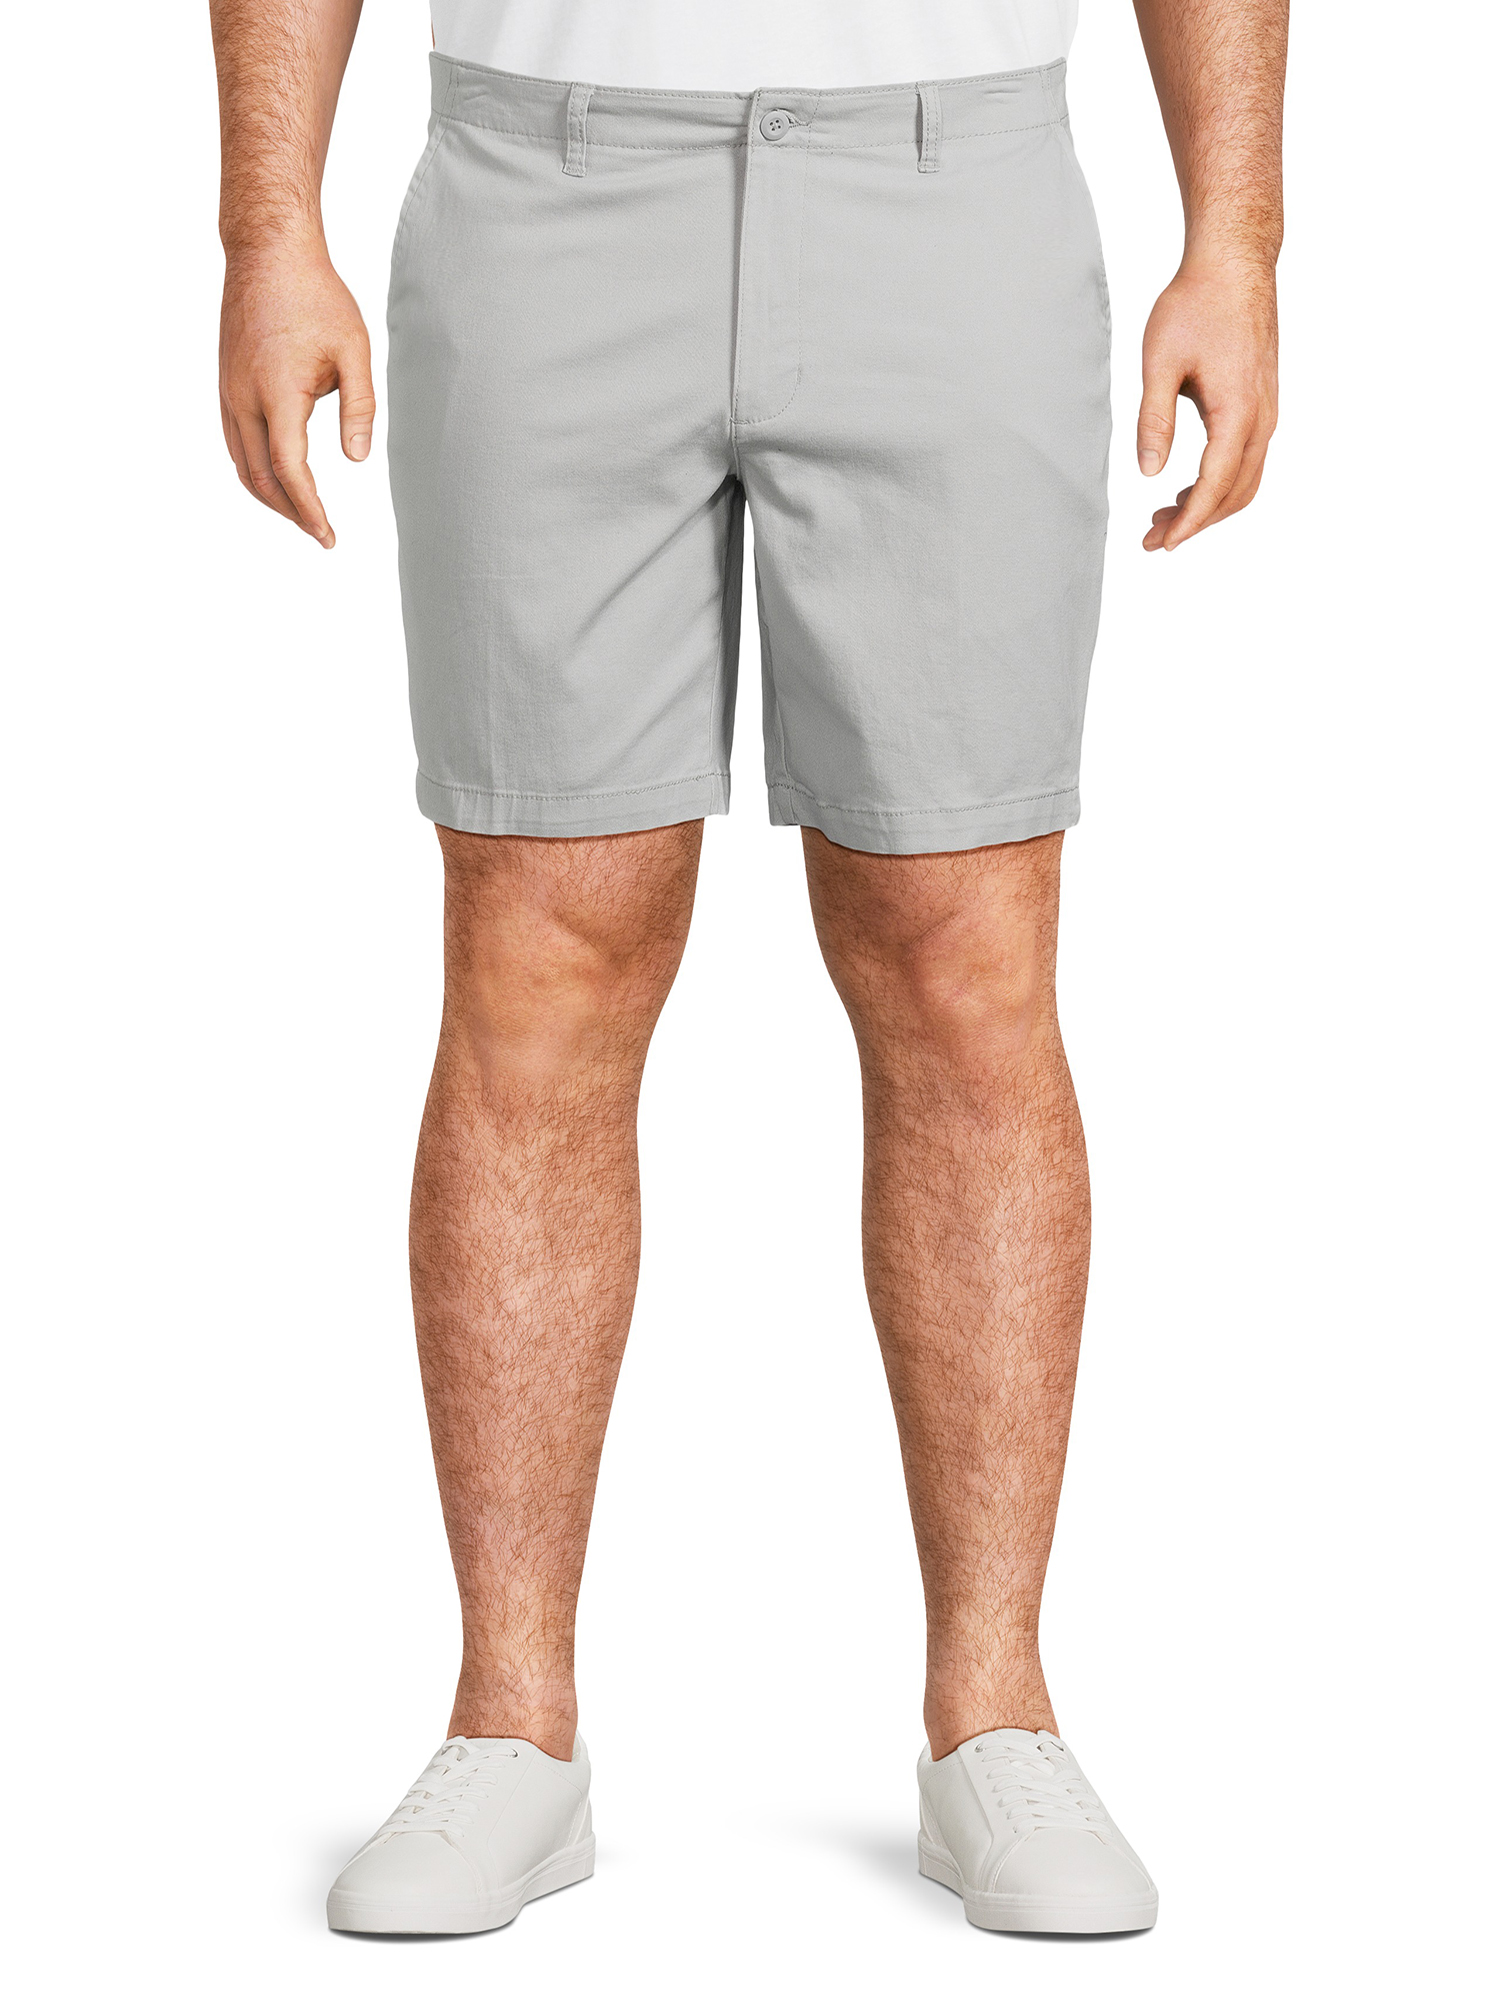 George Men's and Big Men's Flat Front Shorts, 9" Inseam, Sizes 28-54